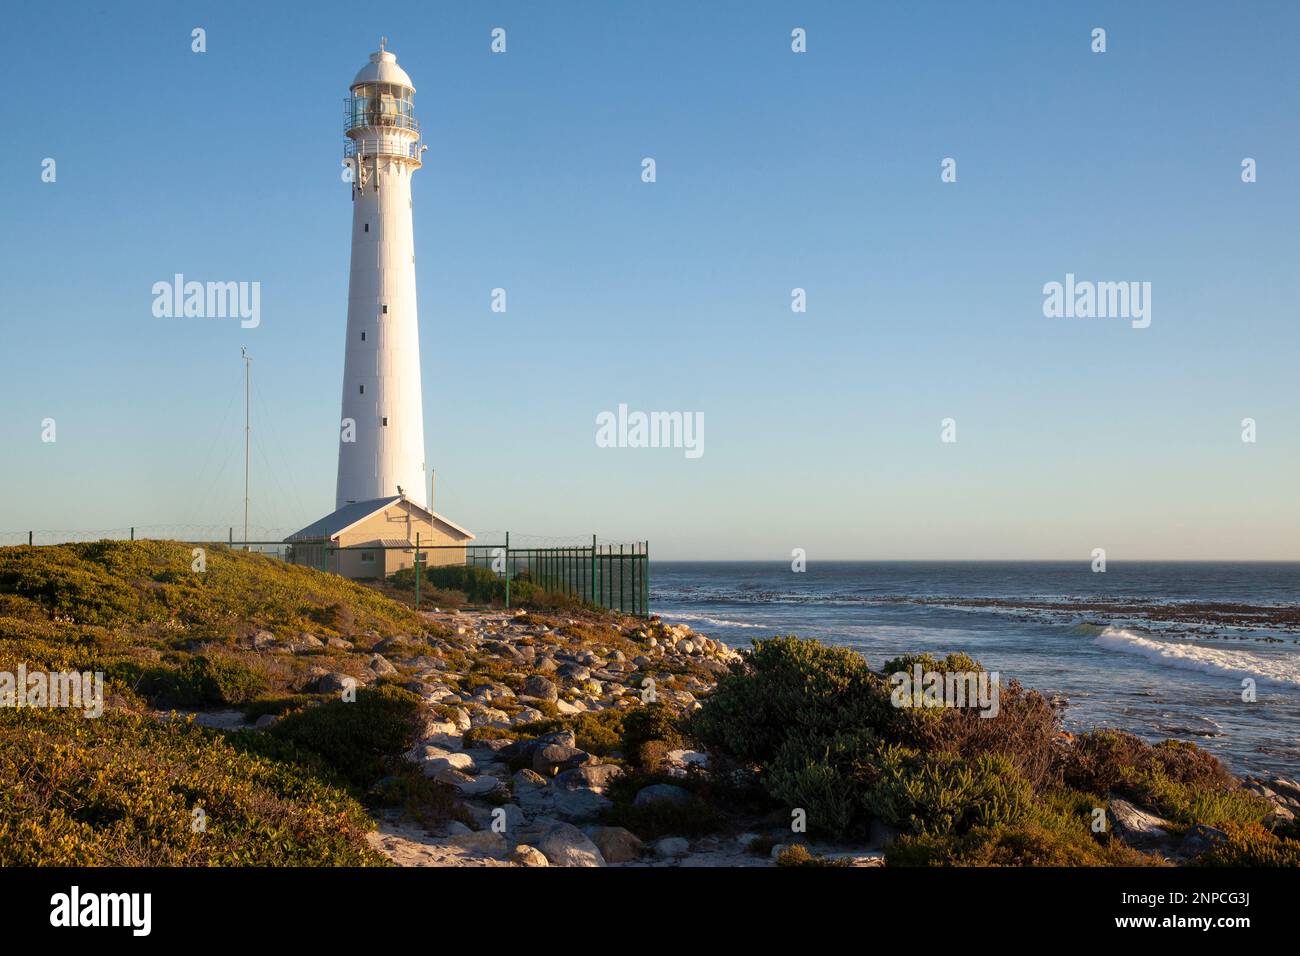 Slangkop Lighthouse, Kommetjie, Cape Town, Cape Peninsula, Western Cape, South Africa. Historical cast iron lighthouse or pharos dating to 1914 Stock Photo